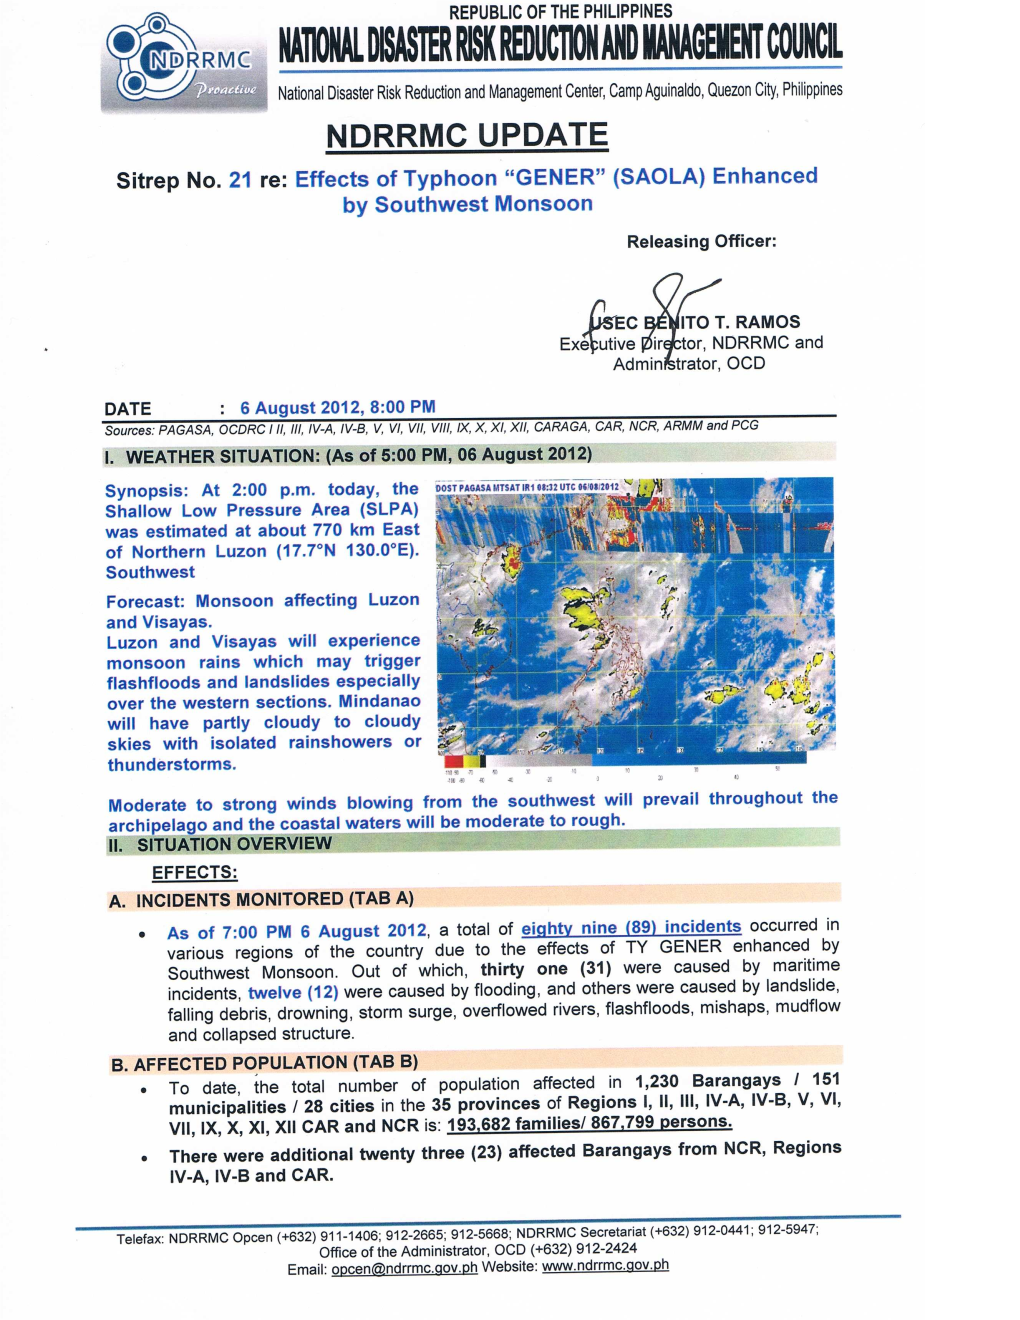 NDRRMC Update Sit Rep 21 Effects of Tropical Storm Gener , 6